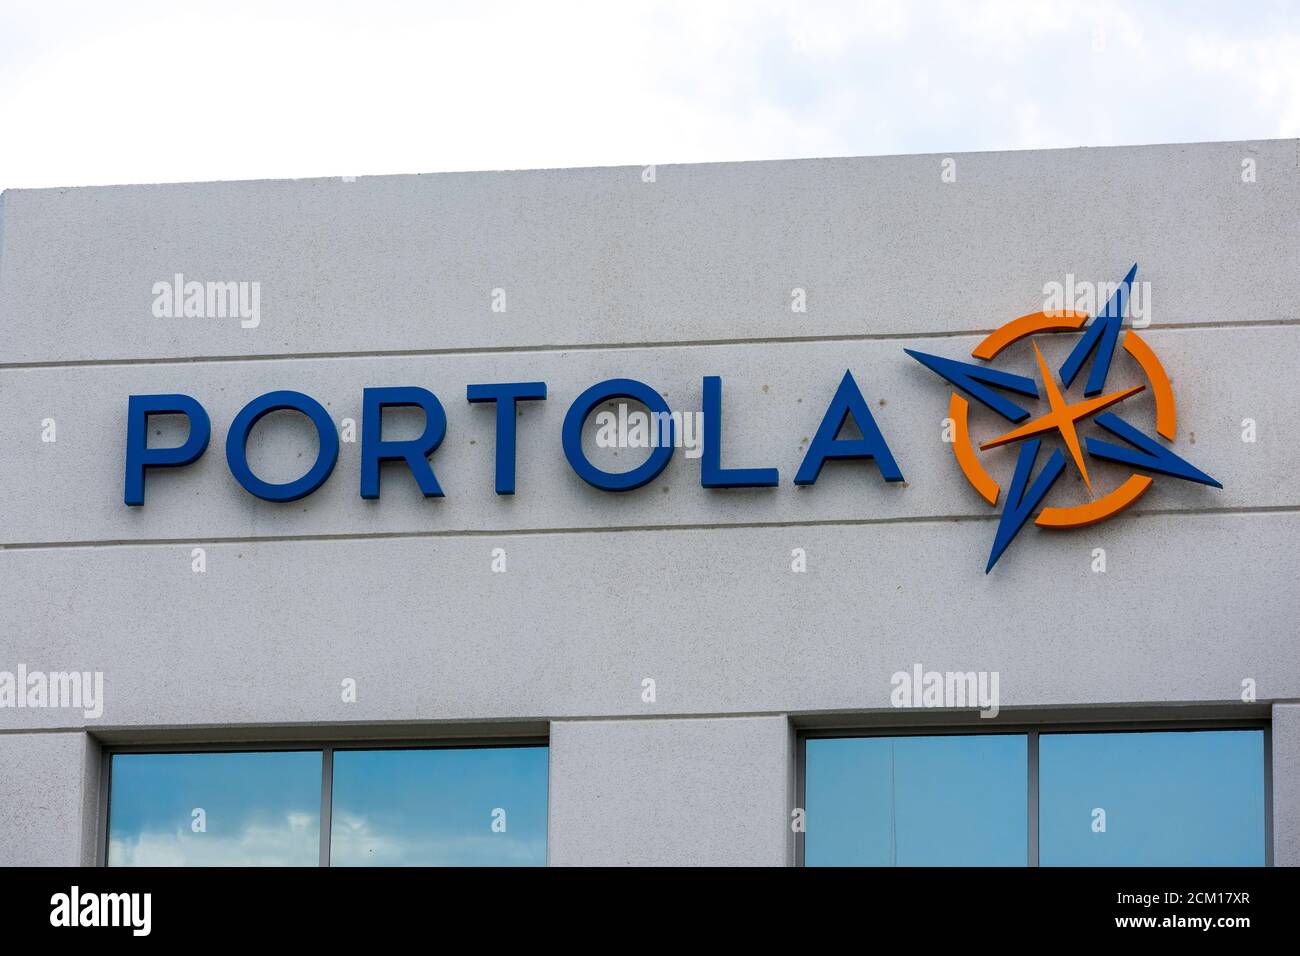 Portola Pharmaceuticals sign and logo. Portola Pharmaceuticals is an American clinical stage biotechnology company - South San Francisco, California, Stock Photo